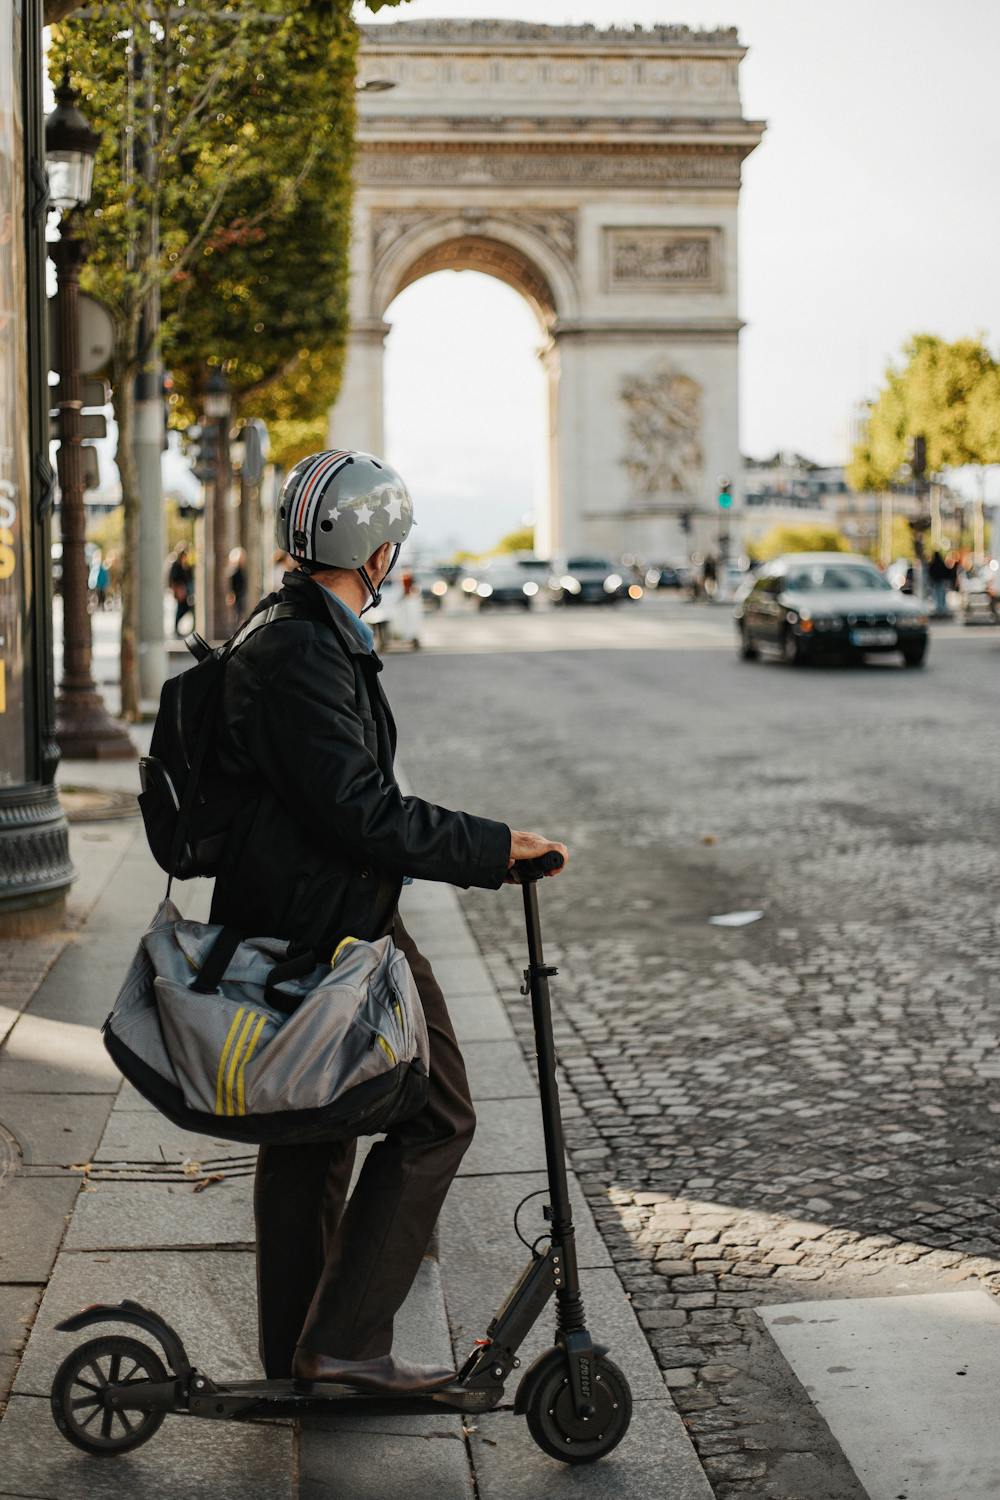 Man riding a e-scooter on the street of Paris.